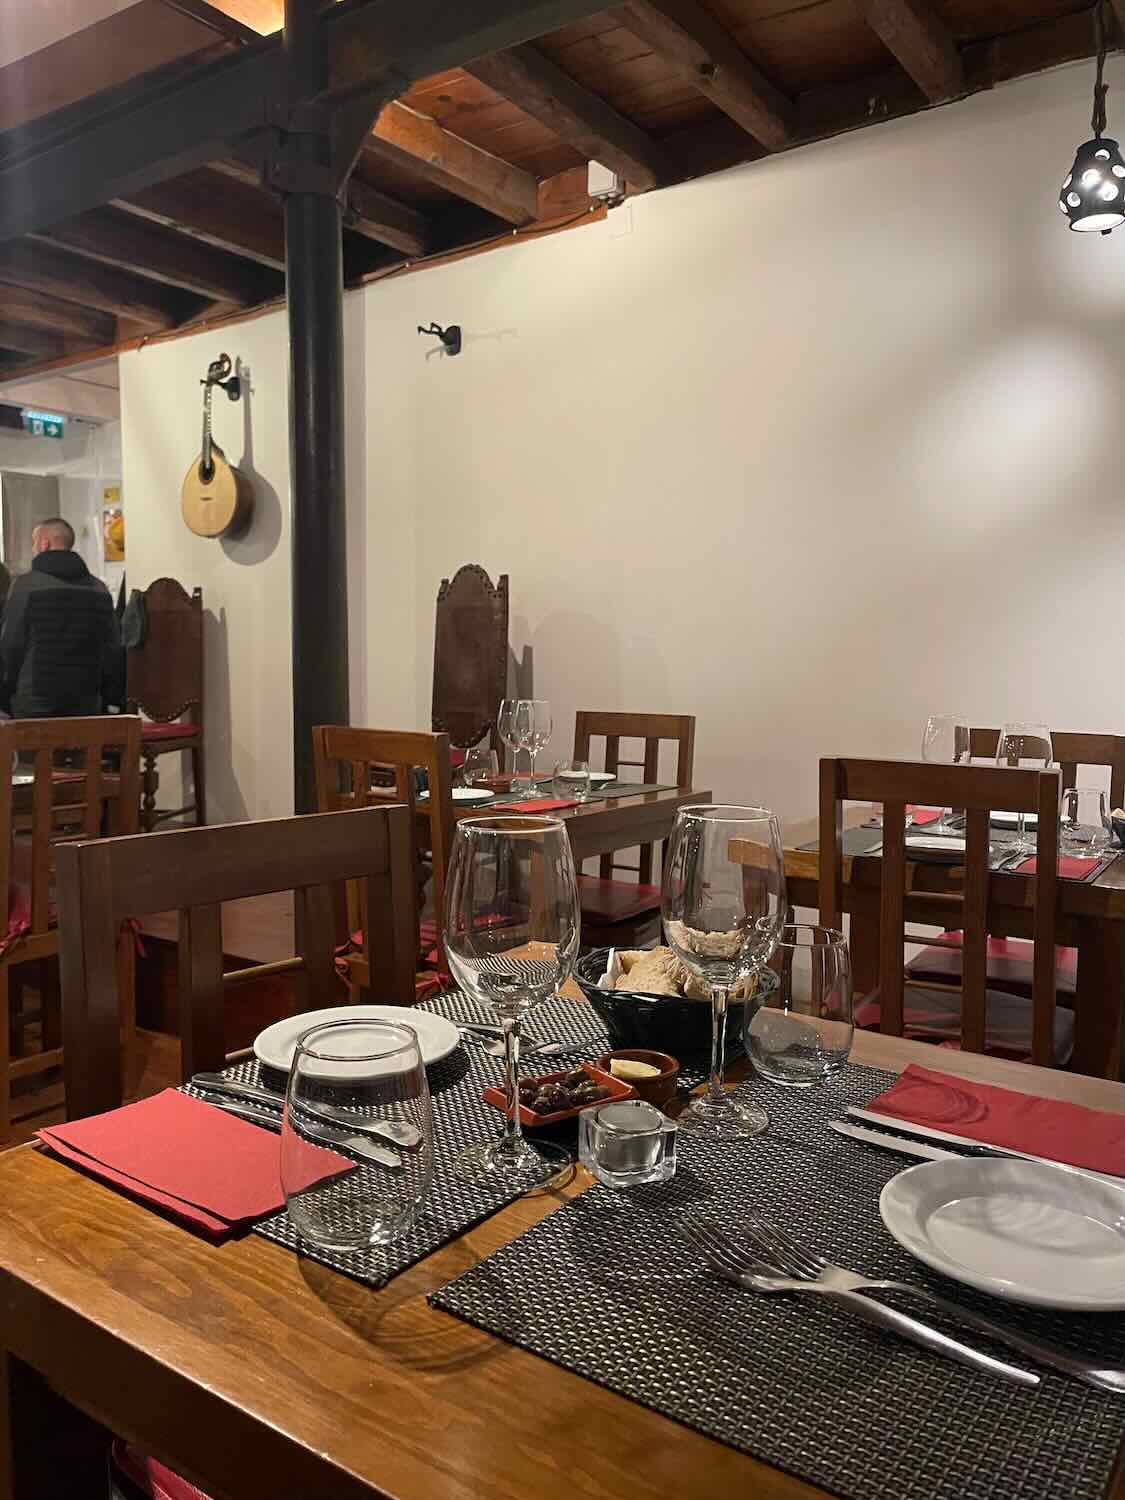 A cozy Lisbon restaurant set for dinner with traditional Fado instruments displayed, inviting guests to a night of cultural immersion through music and cuisine.